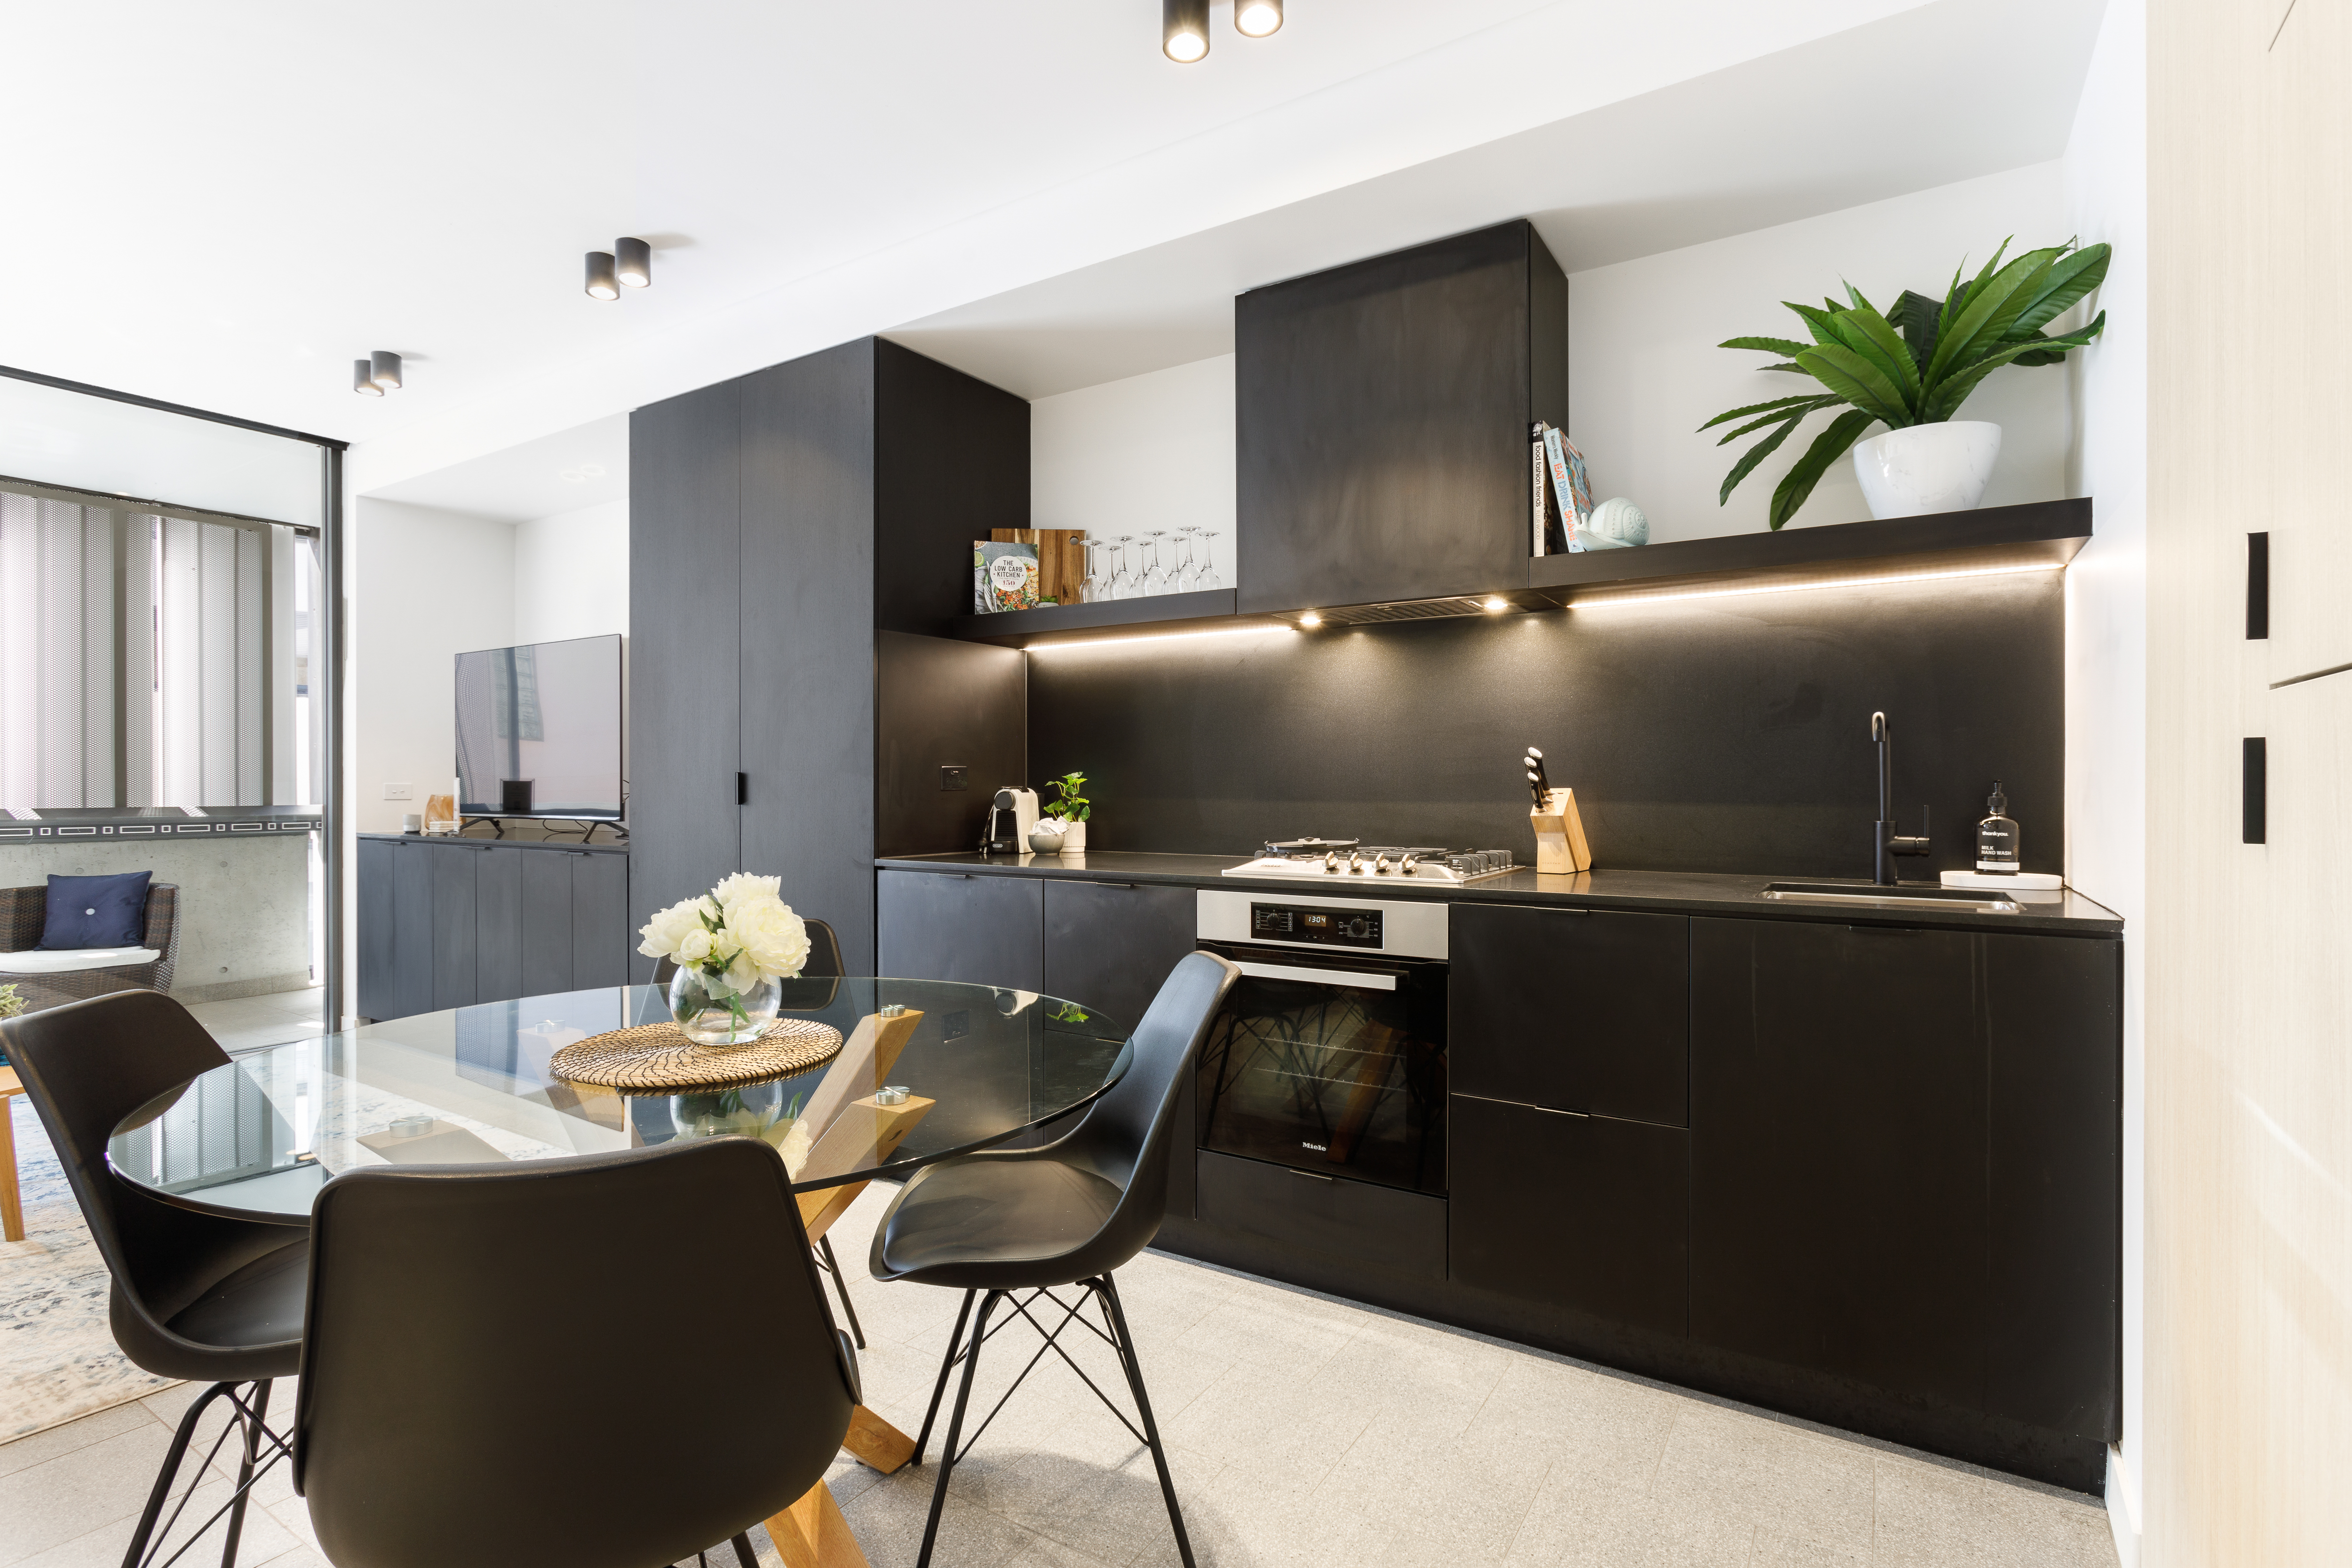 Kitchen - Two Bedroom Apartment - Urban Rest - The Surry Apartments - Sydney